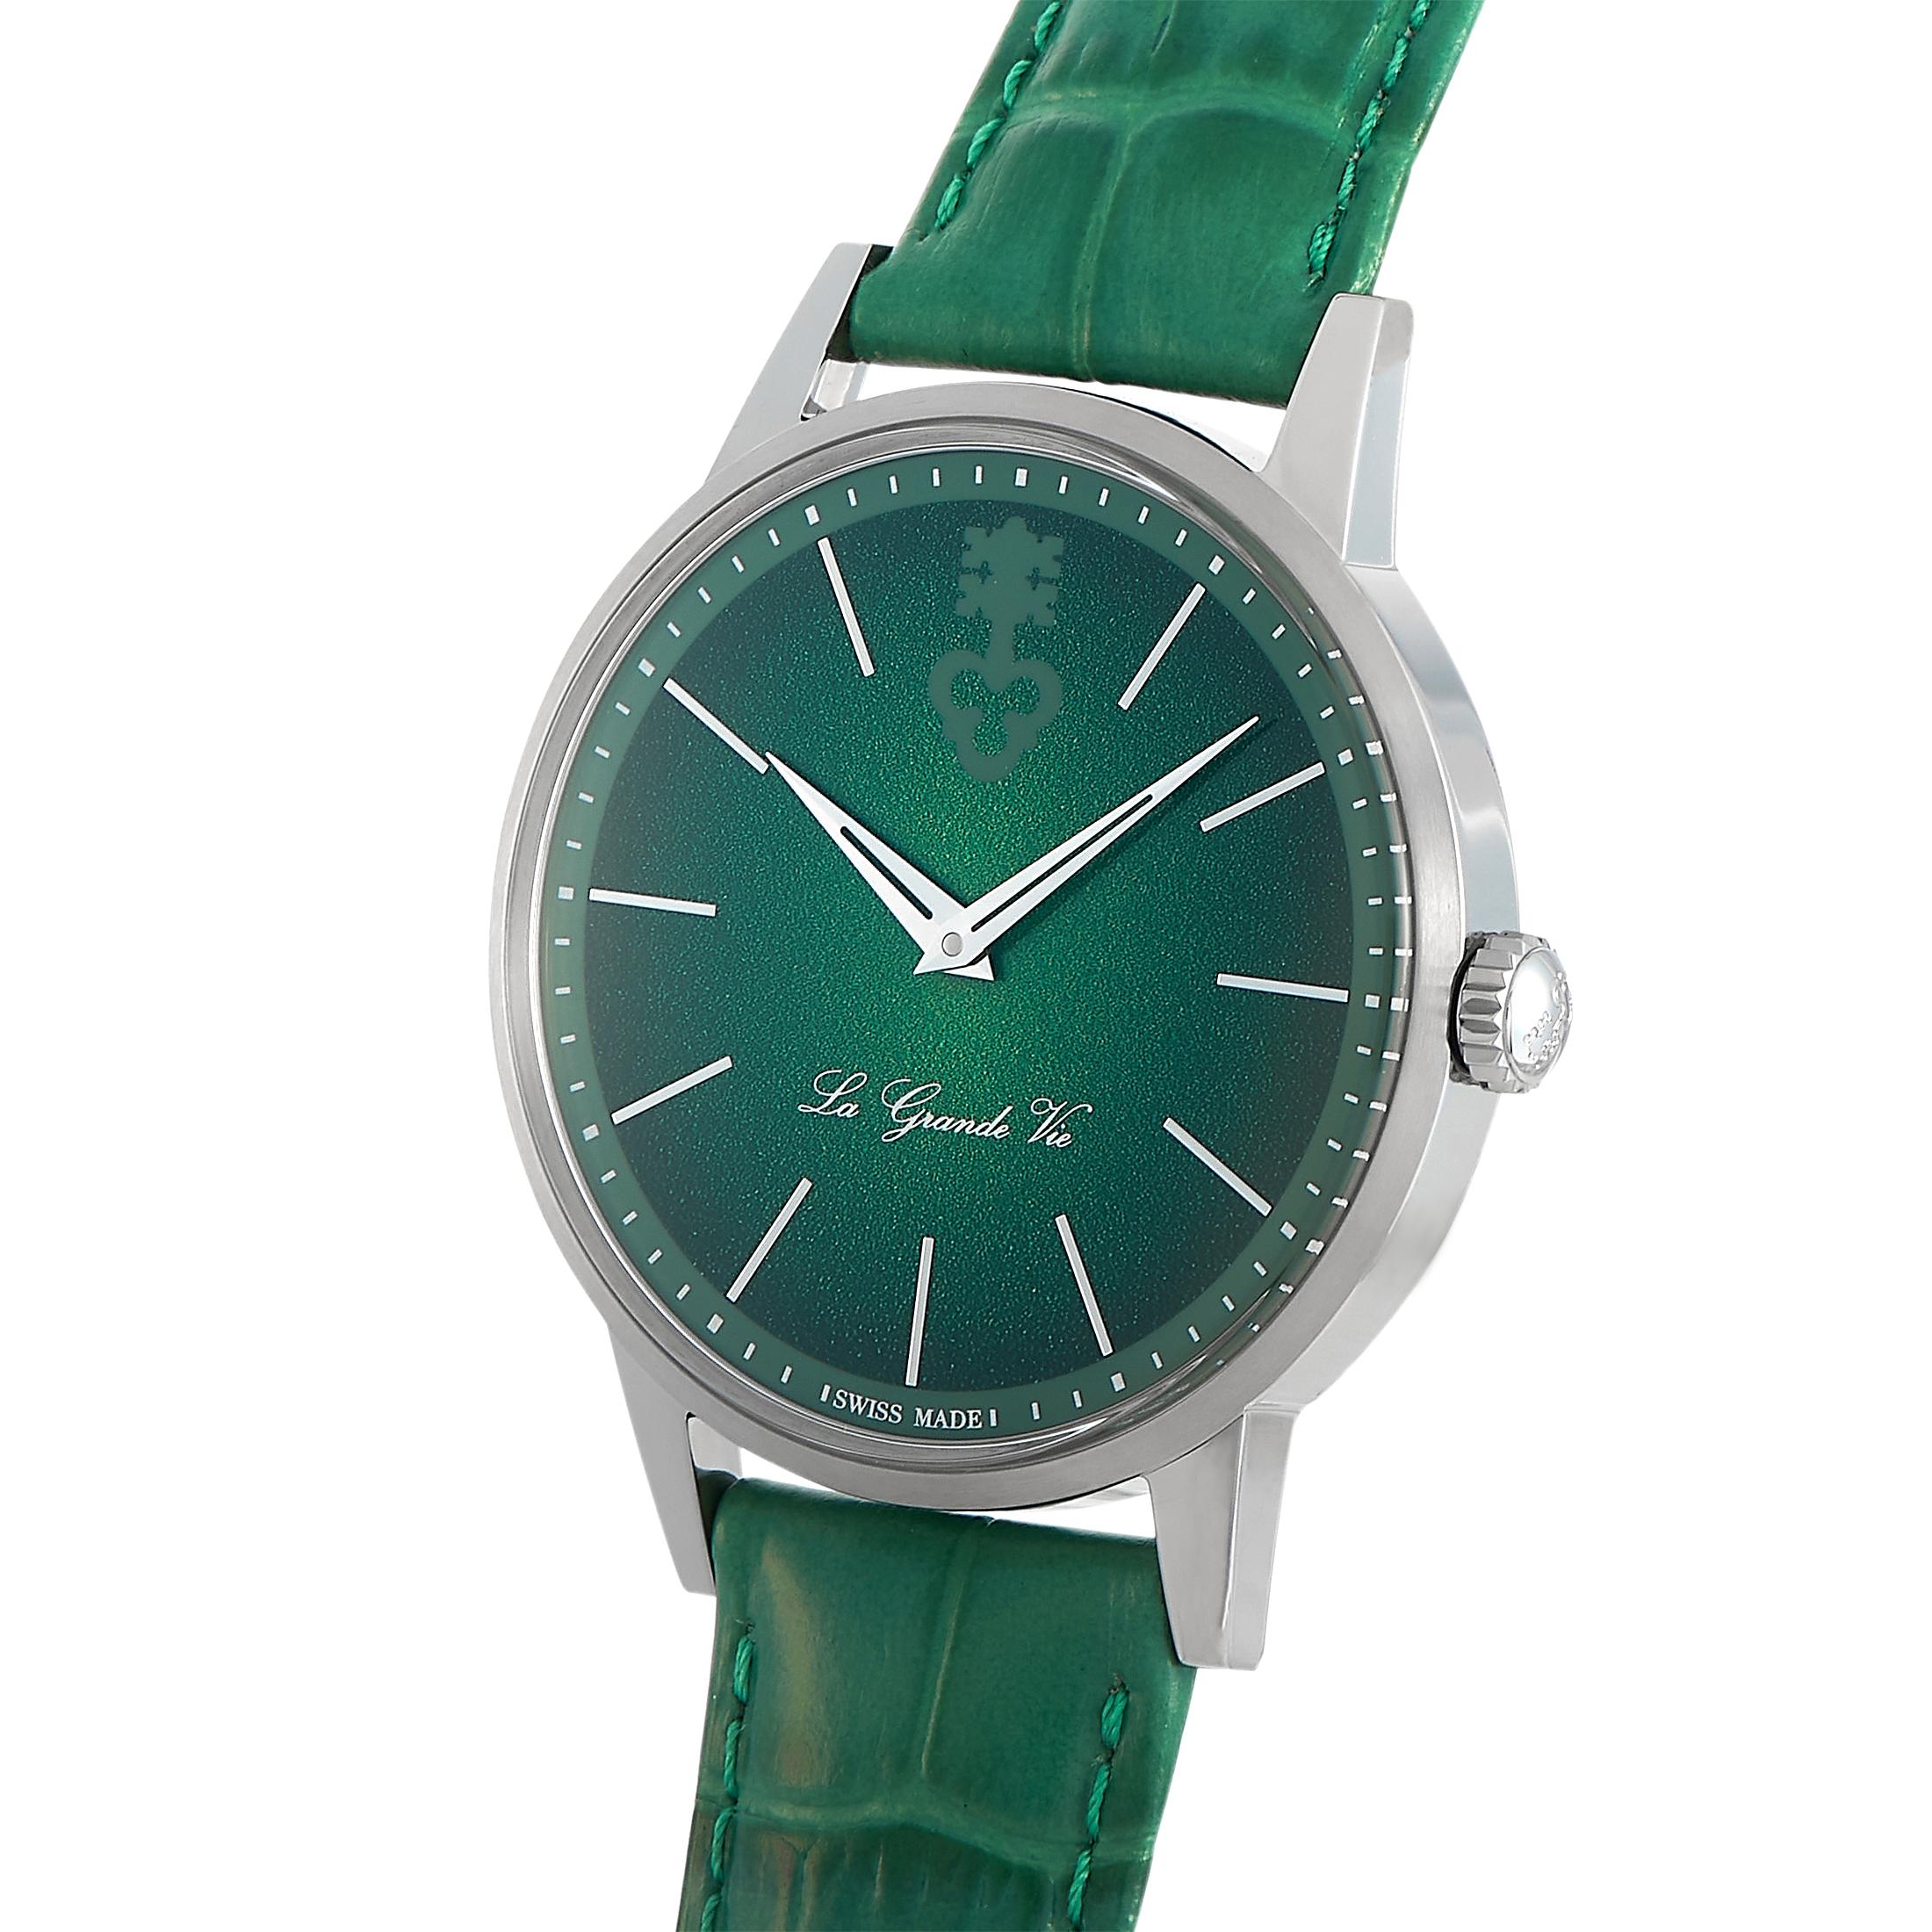 The Corum Heritage La Grande Vie watch, reference number 082.750.04/0057 LG007, is a member of the esteemed “Heritage” collection.
 
 This timepiece comes with a 42 mm titanium case that boasts see-through back. On the green dial, two central